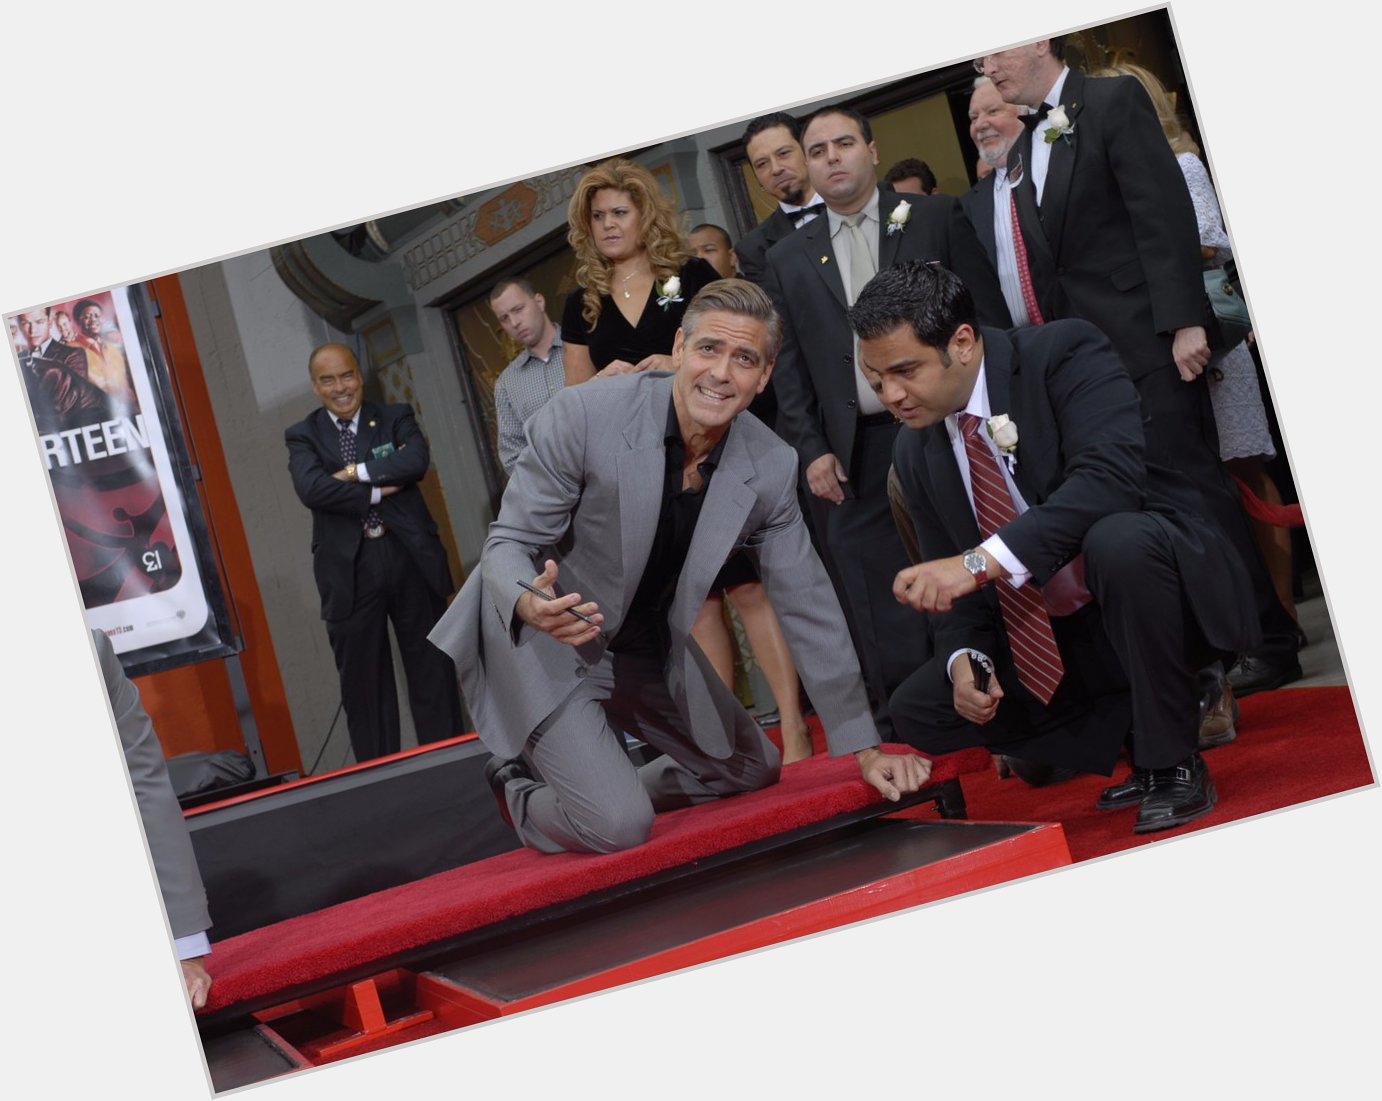 Happy birthday George Clooney! Pictured at his imprint ceremony in 2007. 